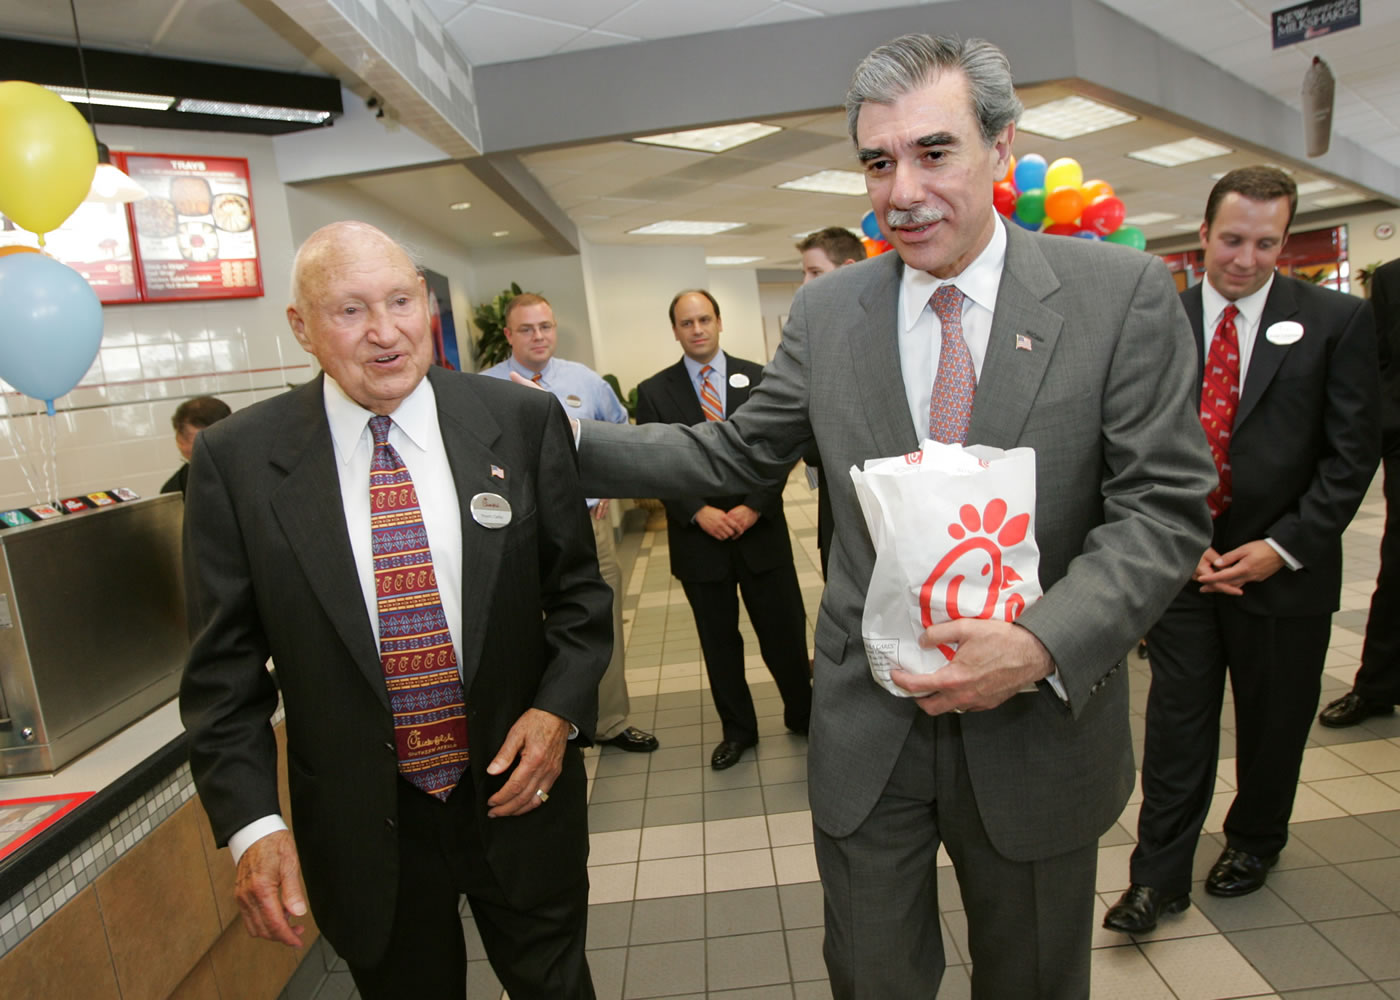 U.S. Secretary of Commerce Carlos Guiterrez, right, leaves with a lunch bag as Chick-fil-A founder S. Truett Cathy, left, walks him out July 25, 2006 after a meeting with Georgia business leaders to discuss immigration reform at Chick-fil-A in Atlanta.